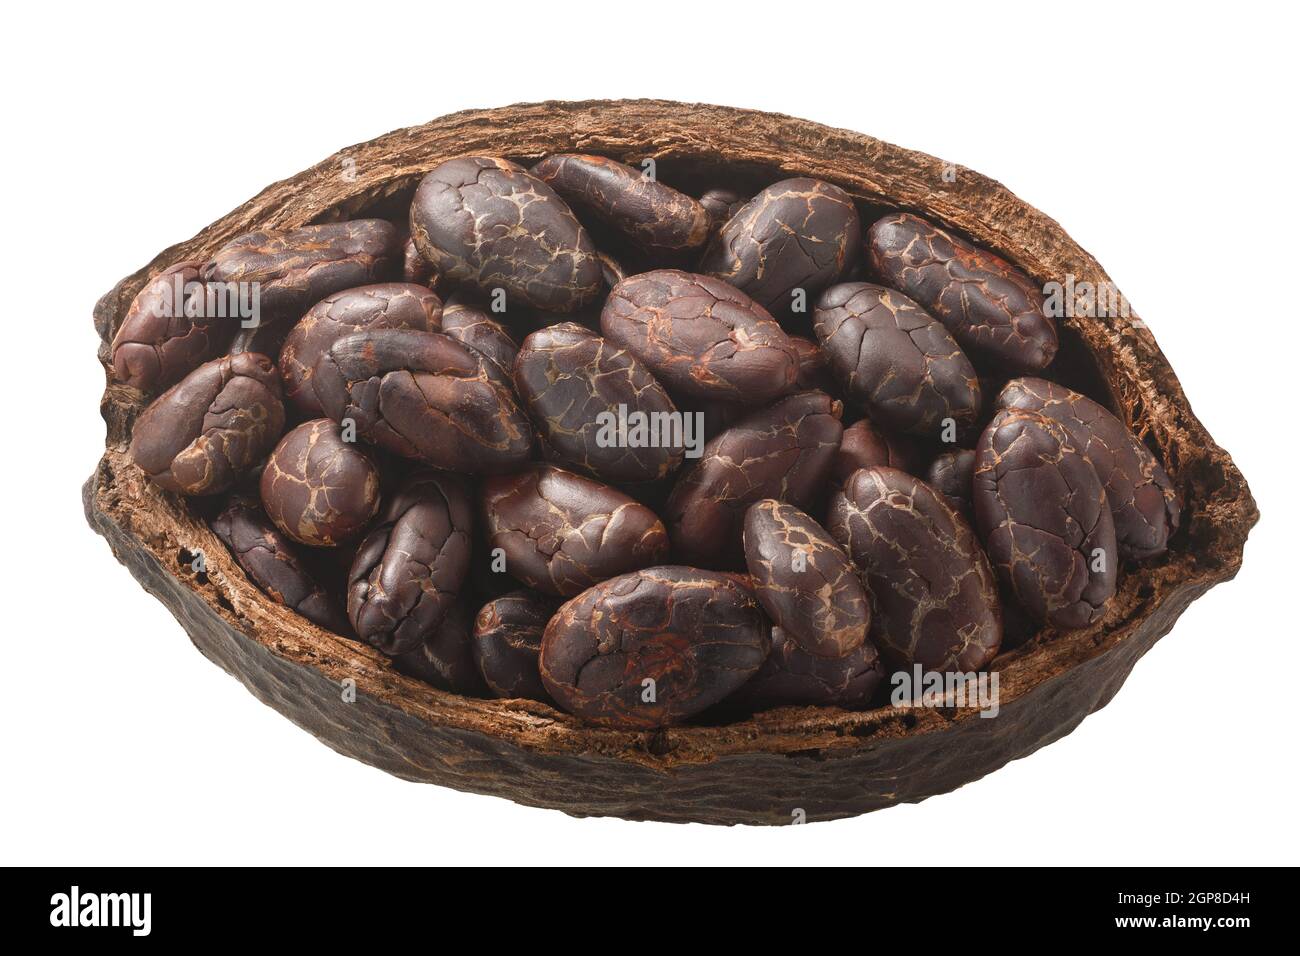 Halved cocoa pod with whole fermented cacao beans (Theobroma cacao fruit w seeds) isolated, top view Stock Photo